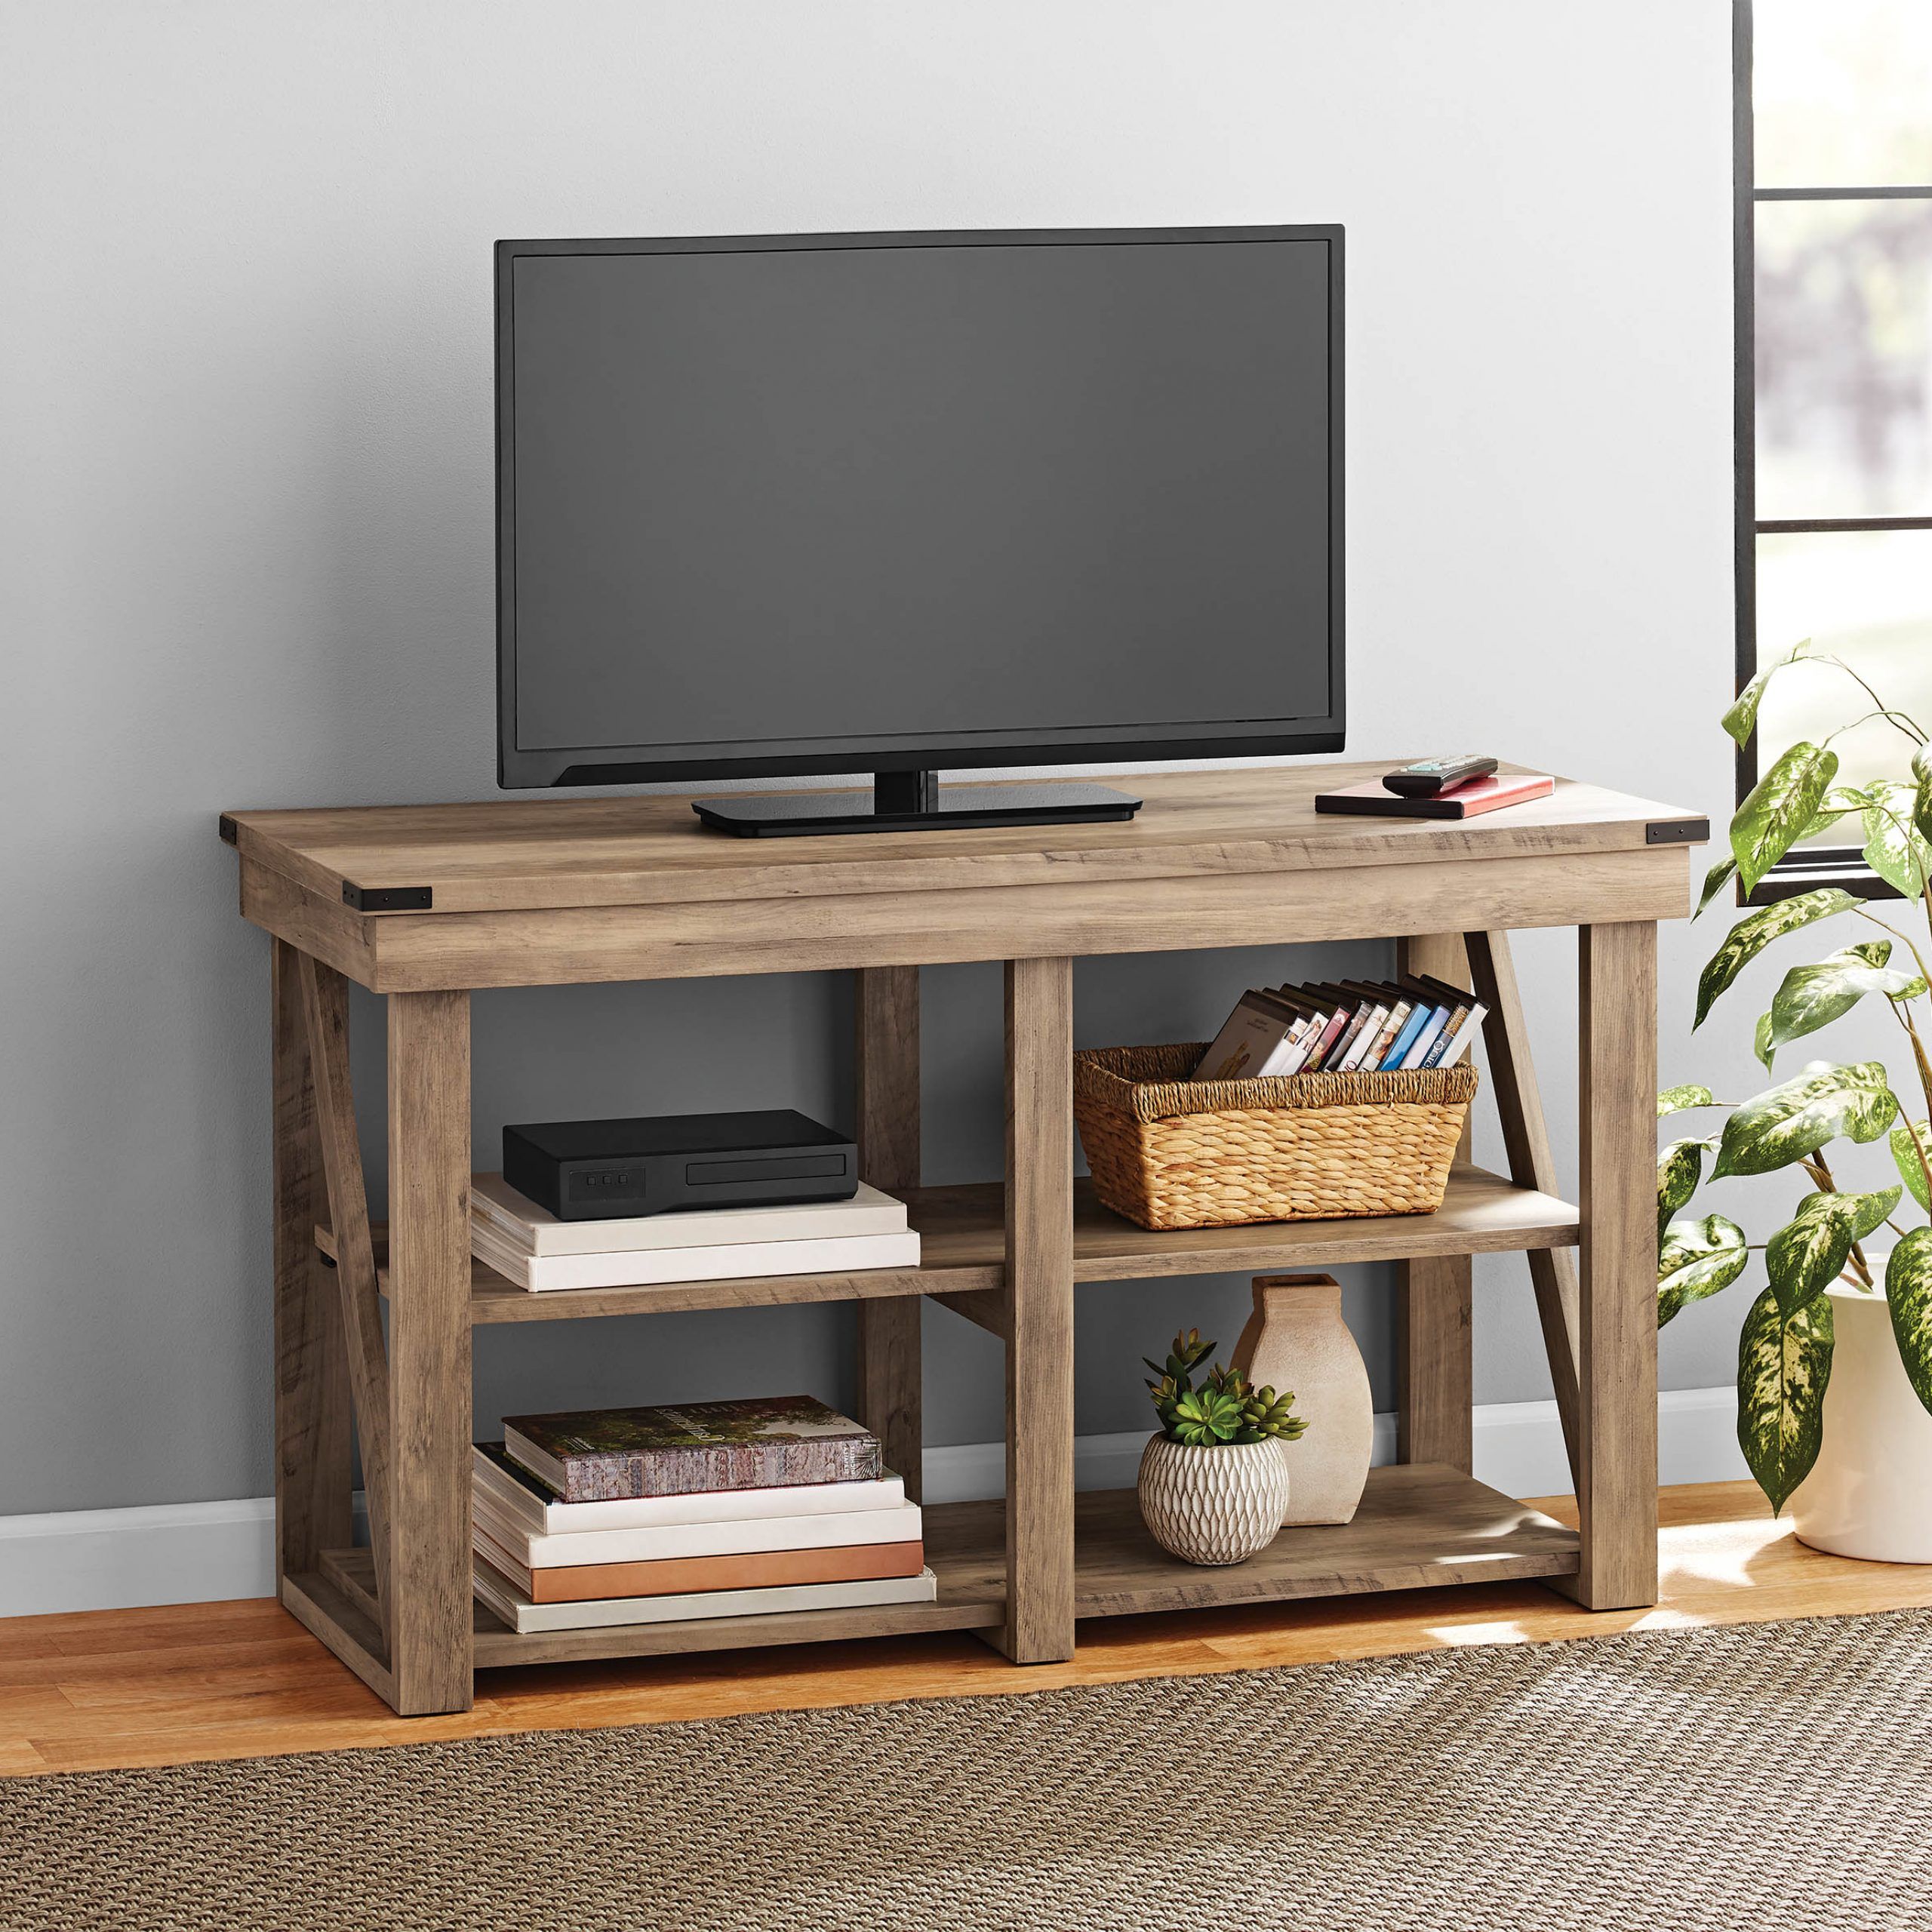 Sahika Tv Stands For Tvs Up To 55" Inside Recent Mainstays Lawson Tv Stand For Tvs Up To 55", Rustic Oak (Photo 2 of 25)